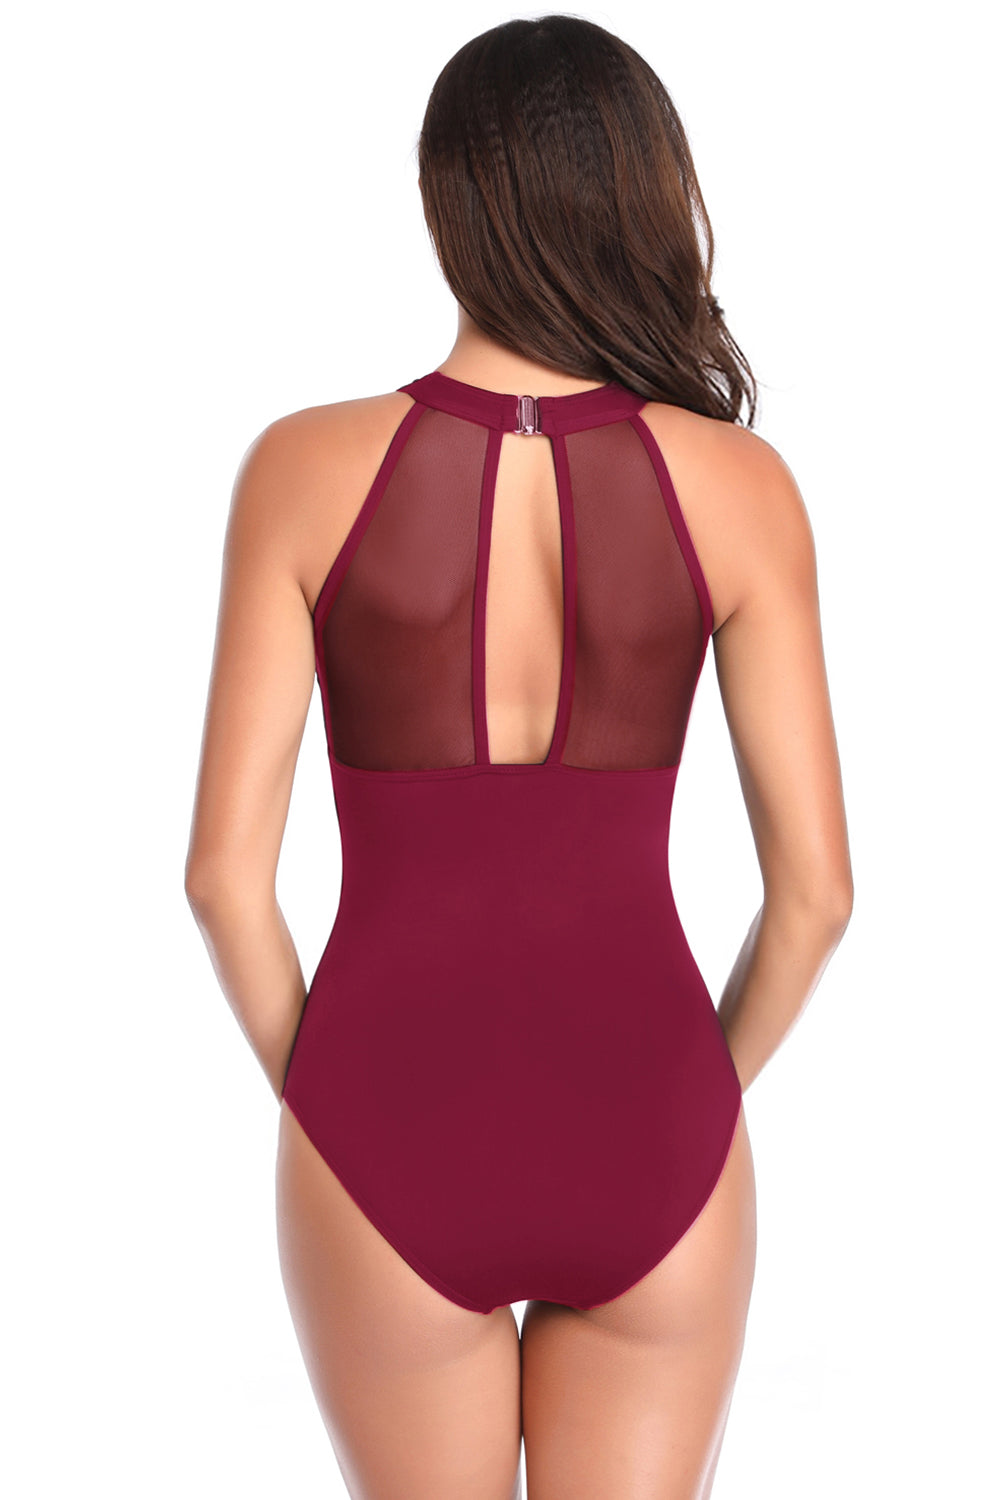 Iyasson Womens Sexy Mesh O-neck Hollow Hook One-piece Swimsuit